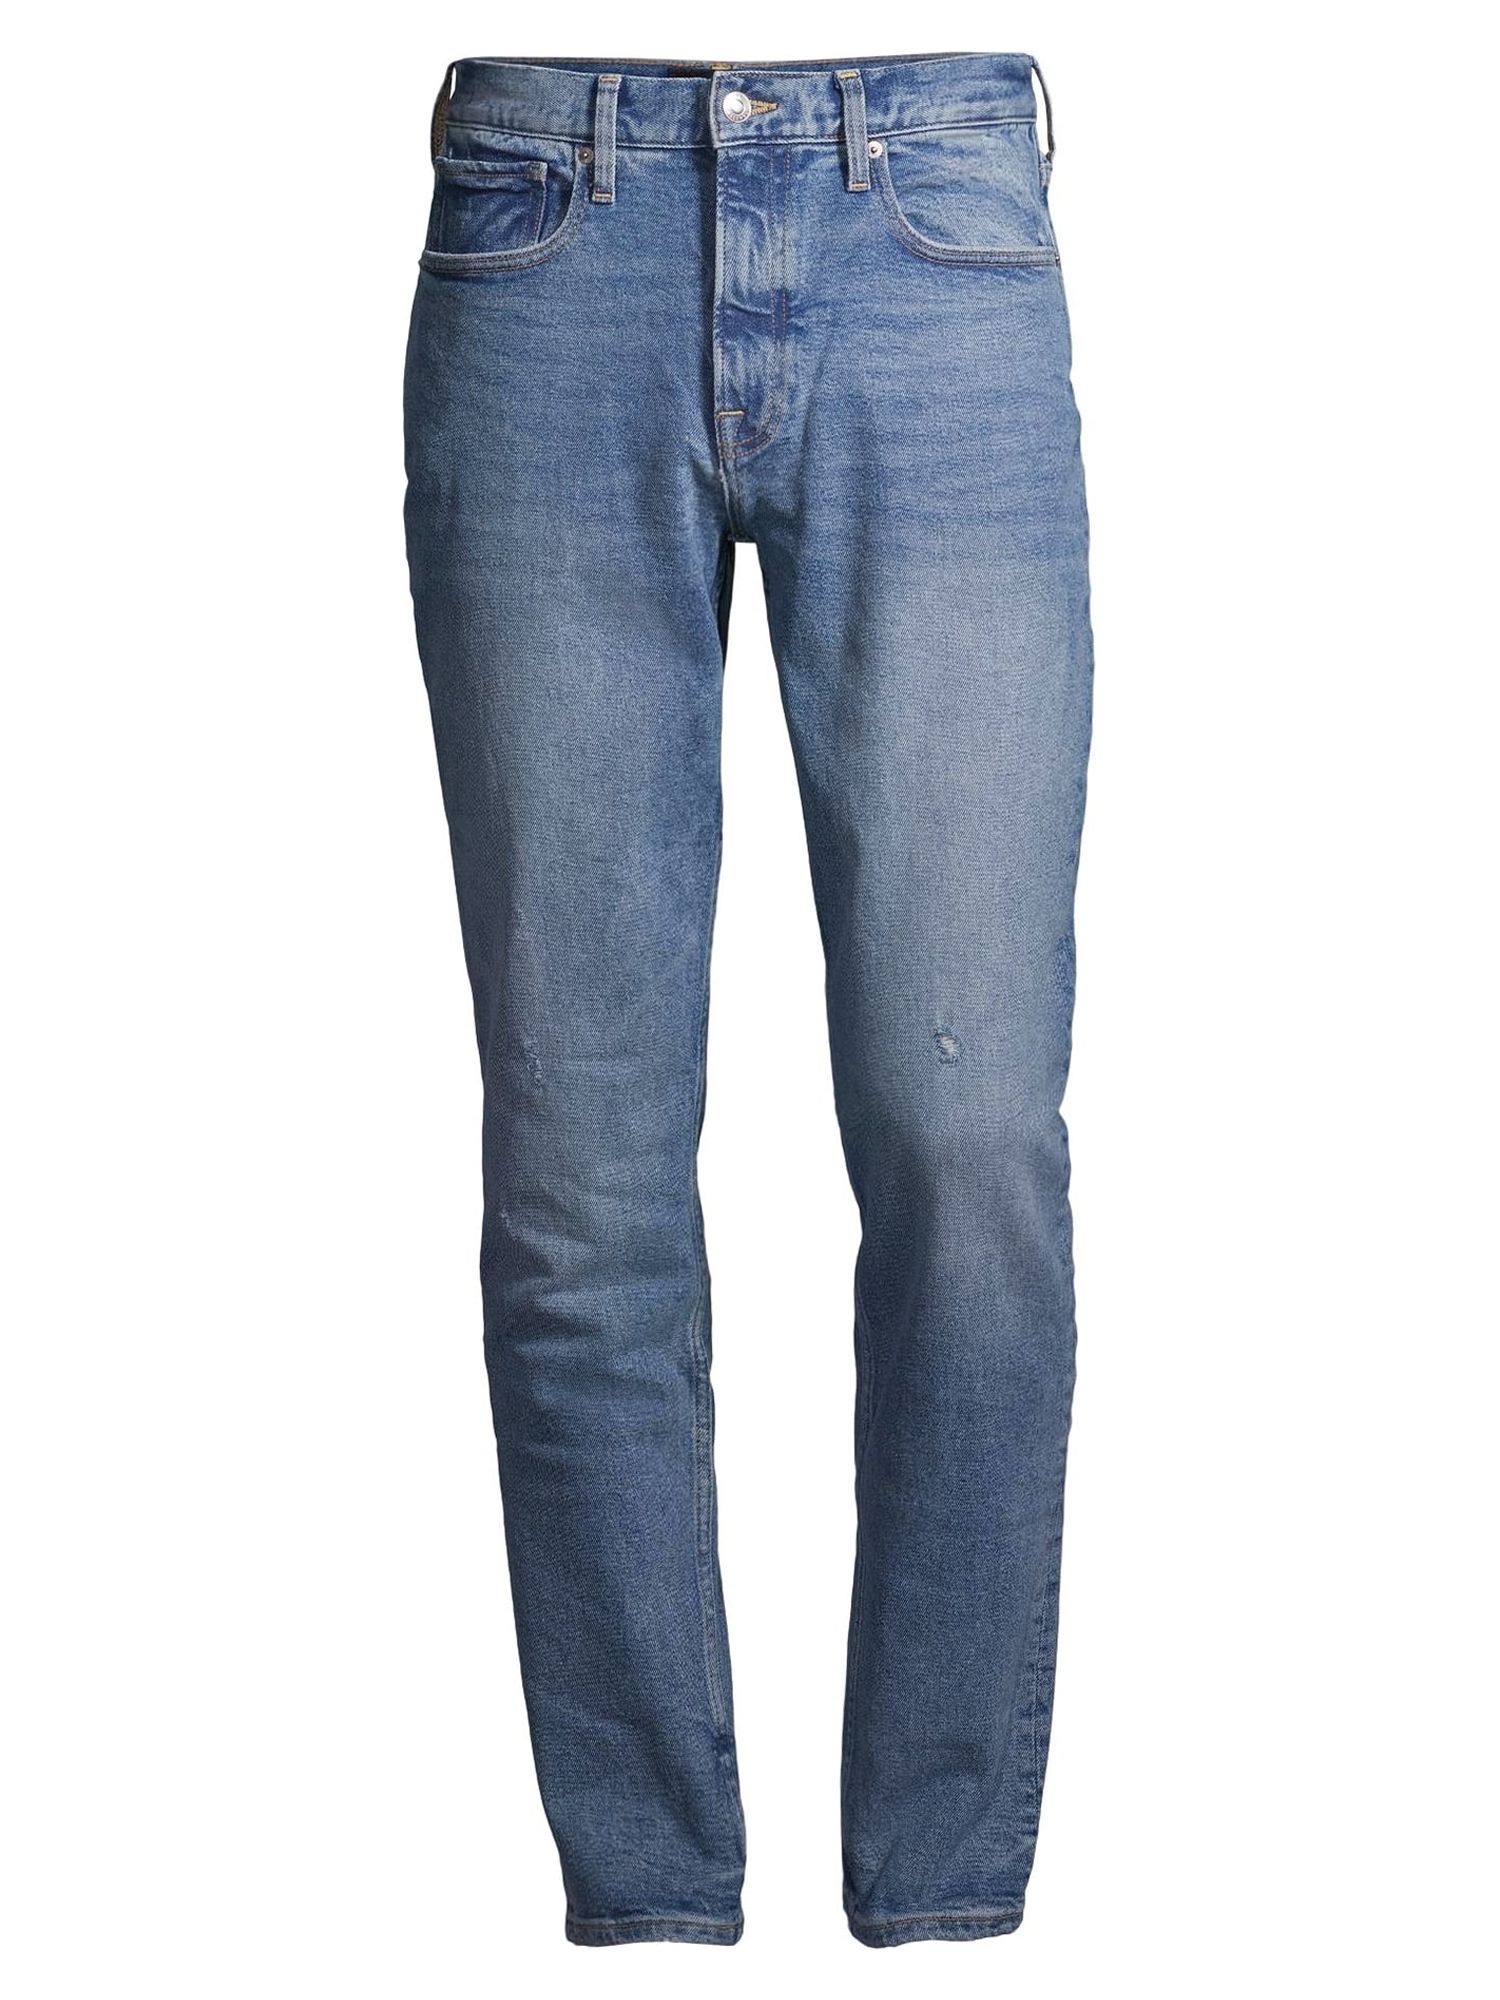 Free Assembly Men's Athletic Fit Jeans - image 5 of 7